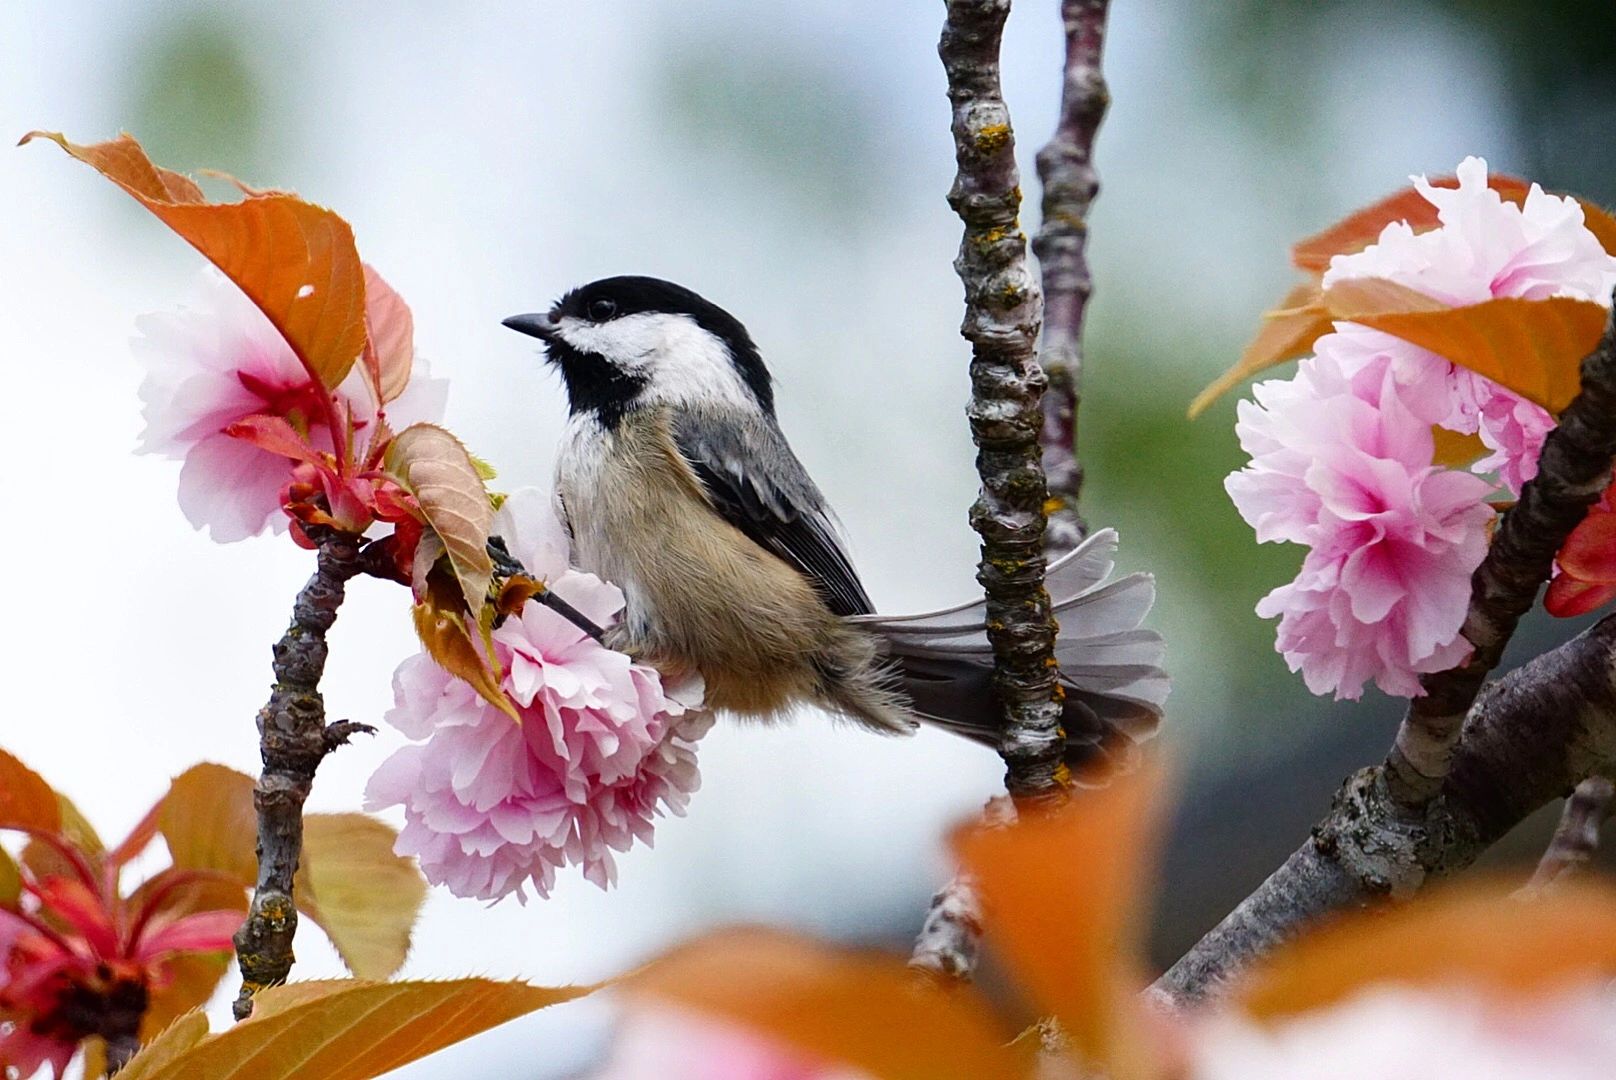 A small black, gray and white Black capped Chickadee bird sits perched on a tree with pink blossoms